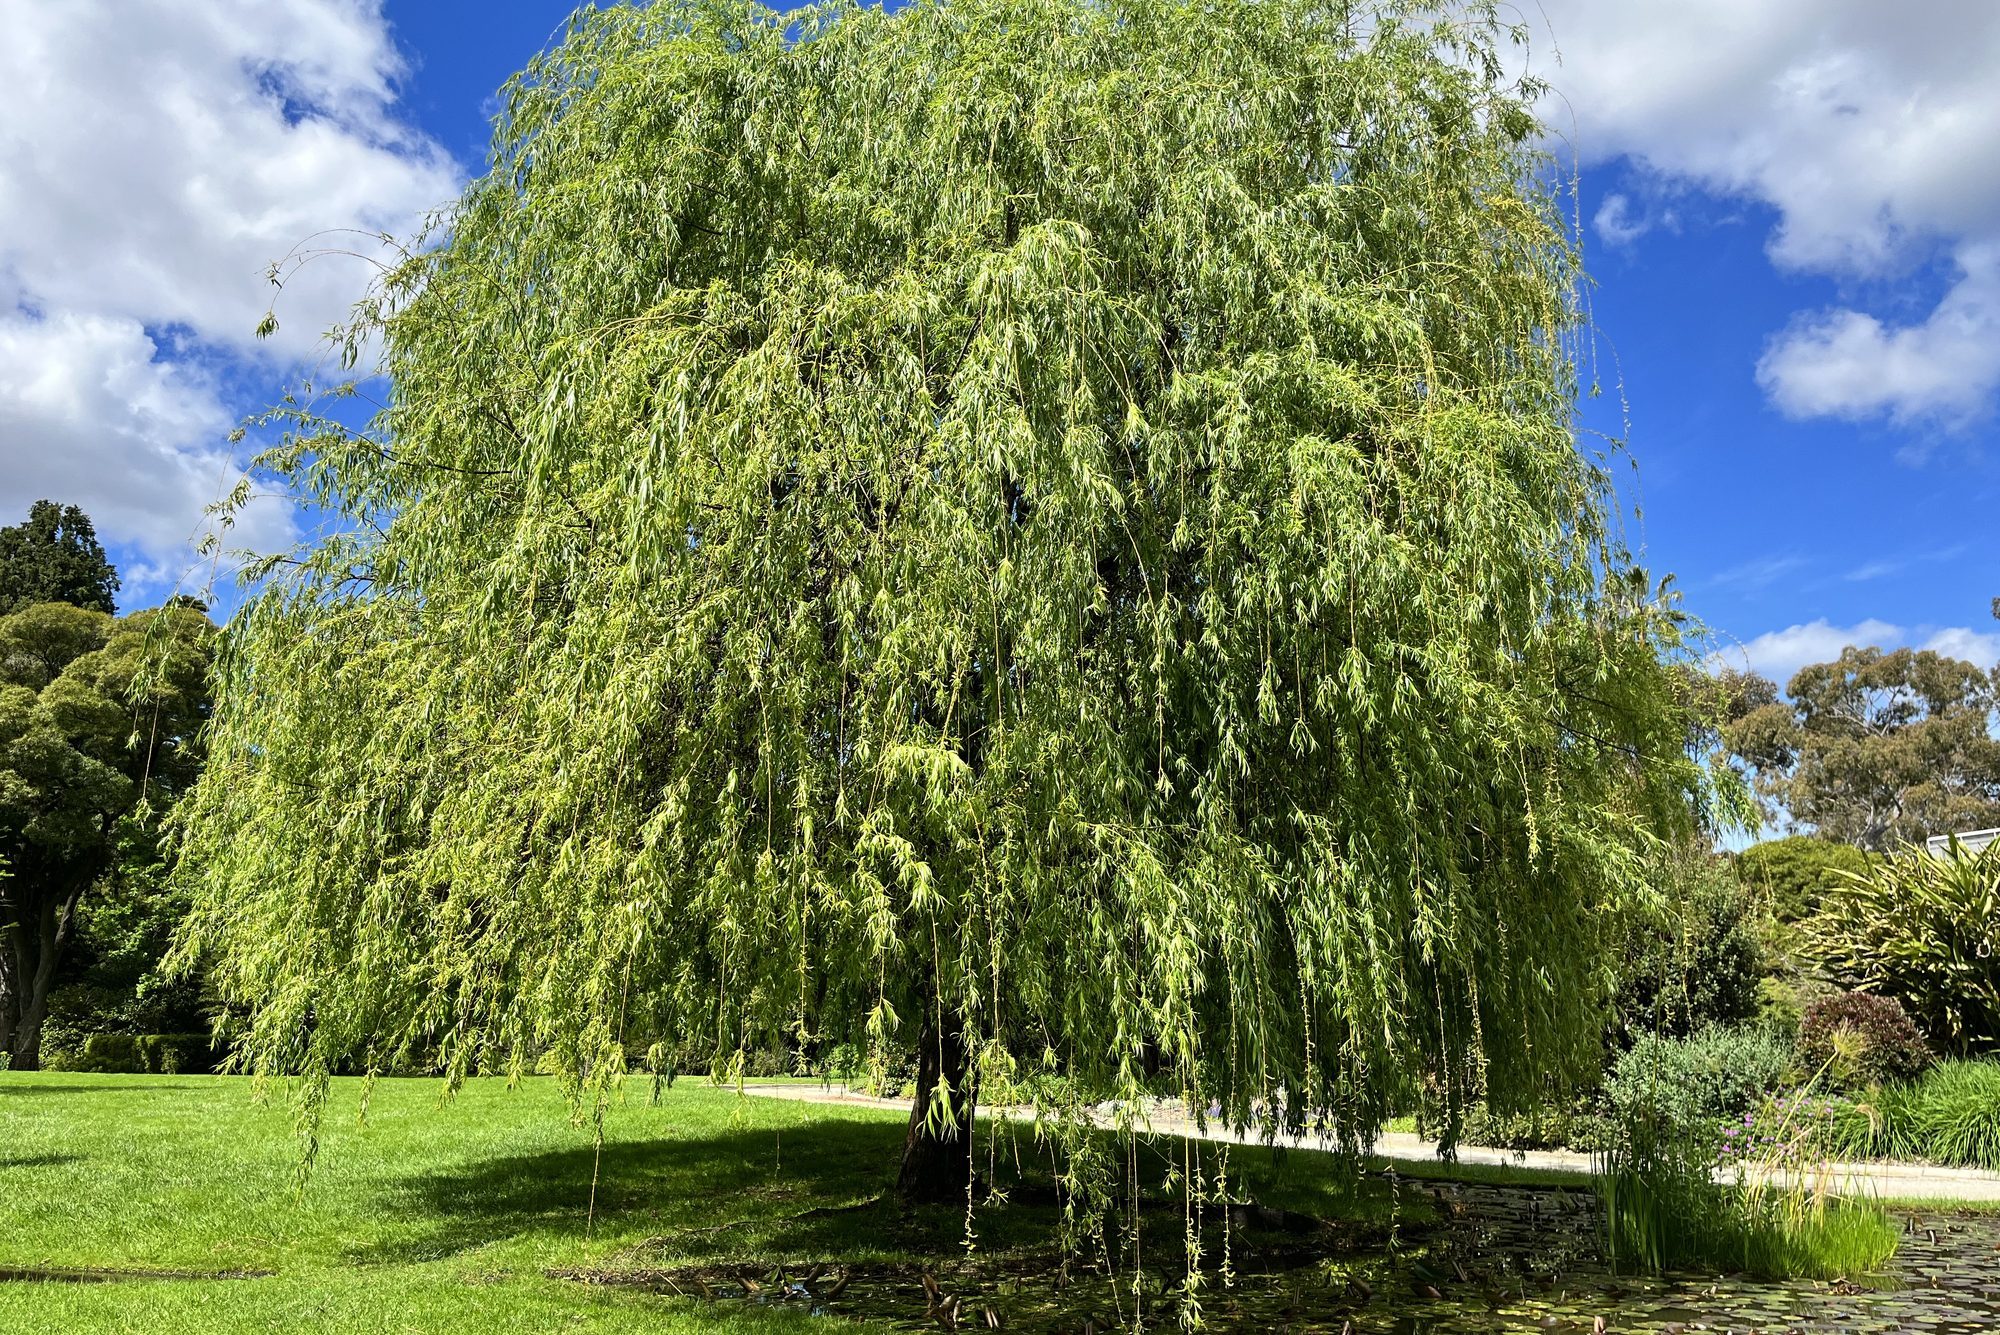 <p>Willow roots slow water flow, helping control flooding, while their big, bushy bodies provide habitat for birds and other wildlife.</p> <p>More than 300 species of caterpillars use willow leaves for food, so planting one means an abundance of <a href="https://www.familyhandyman.com/article/butterfly-vs-moth/" rel="noopener noreferrer">butterflies and moths</a>, including tiger swallowtails, mourning cloaks and sylvan hairstreaks. Willow flowers are also food for <a href="https://www.familyhandyman.com/article/10-crazy-things-you-didnt-know-about-bees/" rel="noopener noreferrer">bumblebees</a> and other insects. "Some people feel they are messy, but the immense benefits to wildlife outweigh the mess to me," says Glassey.</p> <p>Willows are native to much of the country, and species range from trees to shrubs. It's important to plant one that is native to your area, especially if you're in a dry region, because they use a lot of water. Most willows prefer sunny, moist to wet soil. Don't plant them near your house or other structures because their <a href="https://www.familyhandyman.com/list/worst-trees-for-your-homes-plumbing/" rel="noopener noreferrer">root systems can be invasive</a>.</p>